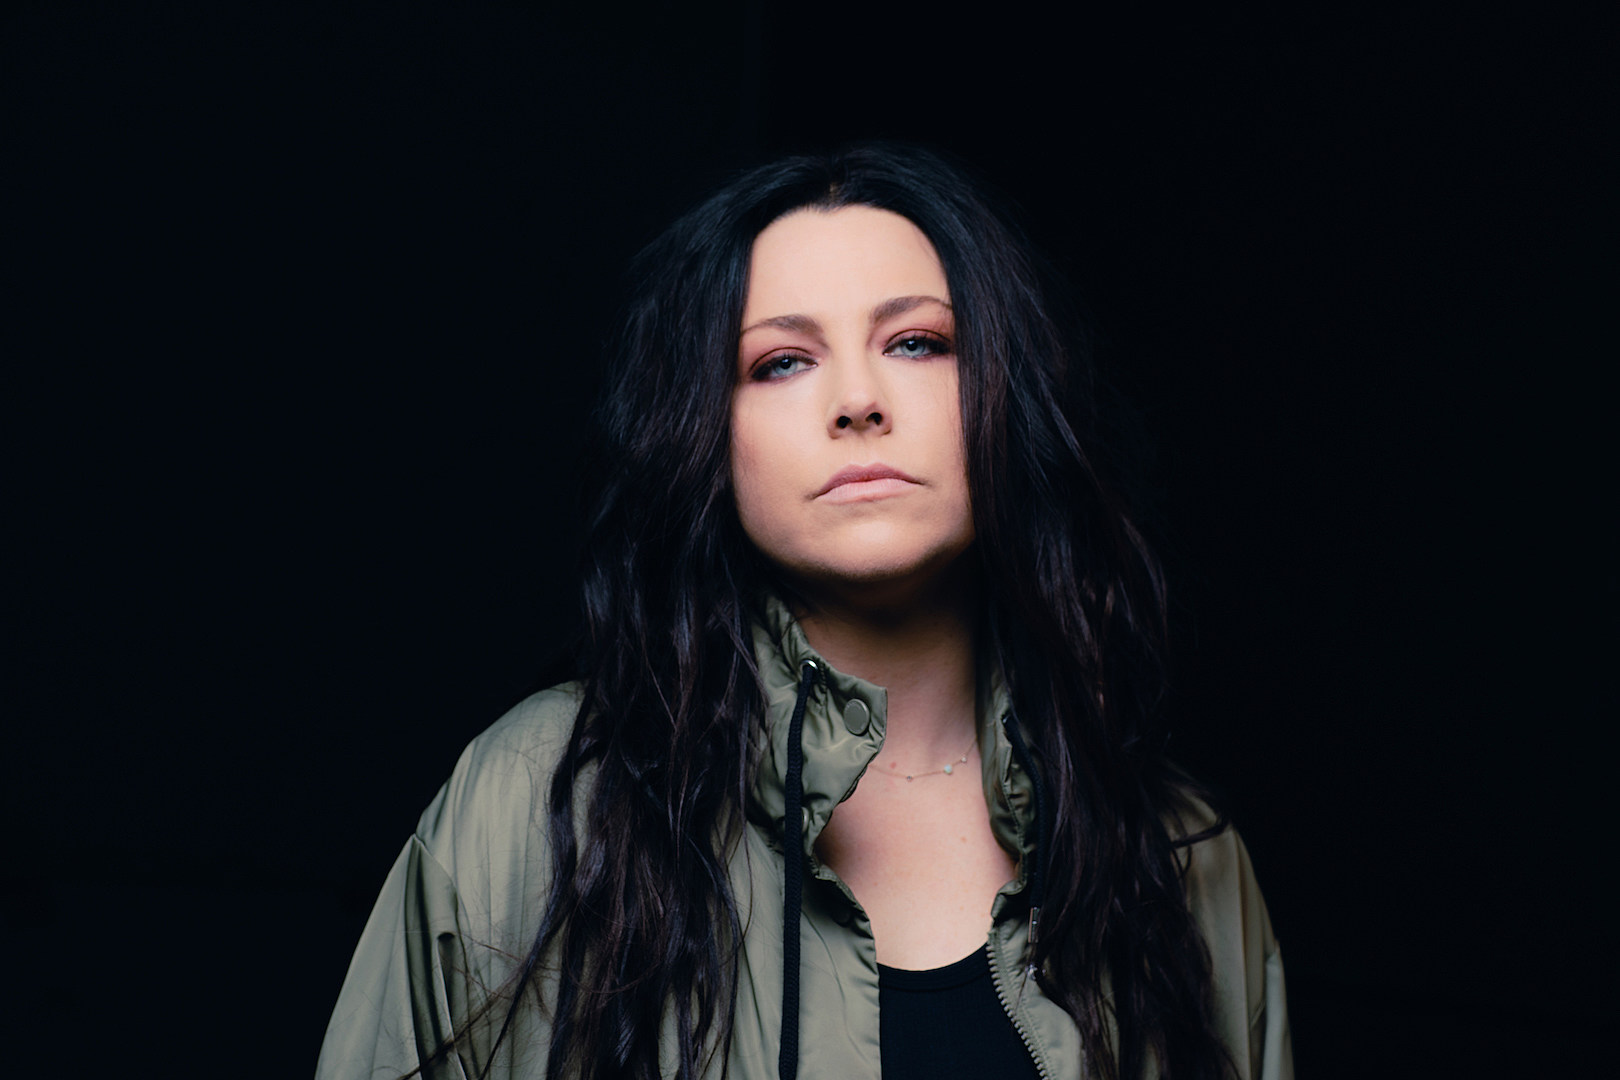 Amy Lee Says If We Can't Face Darkness, We're Living a Lie